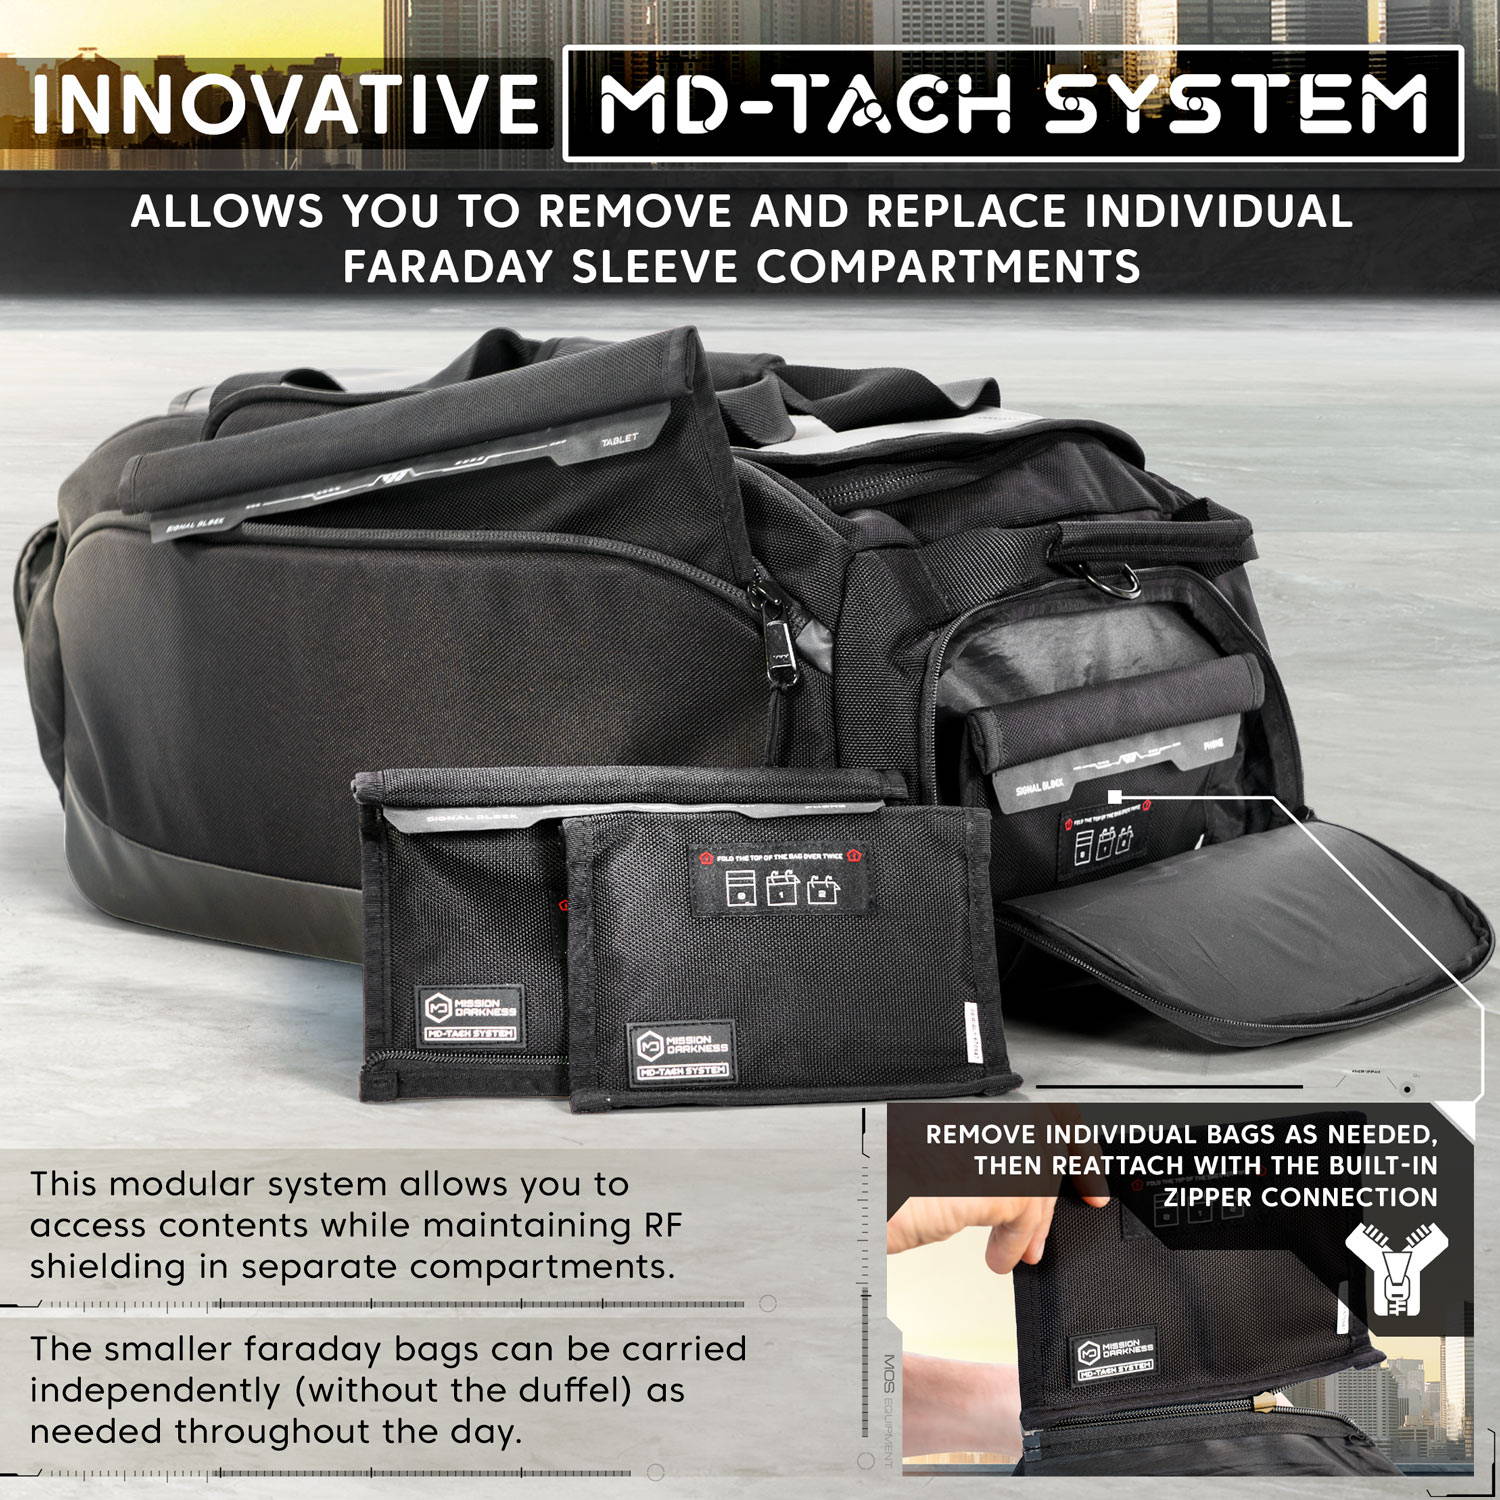 Innovative MD-Tach System uses a zipper attachment to connect individual faraday bags to the main duffel